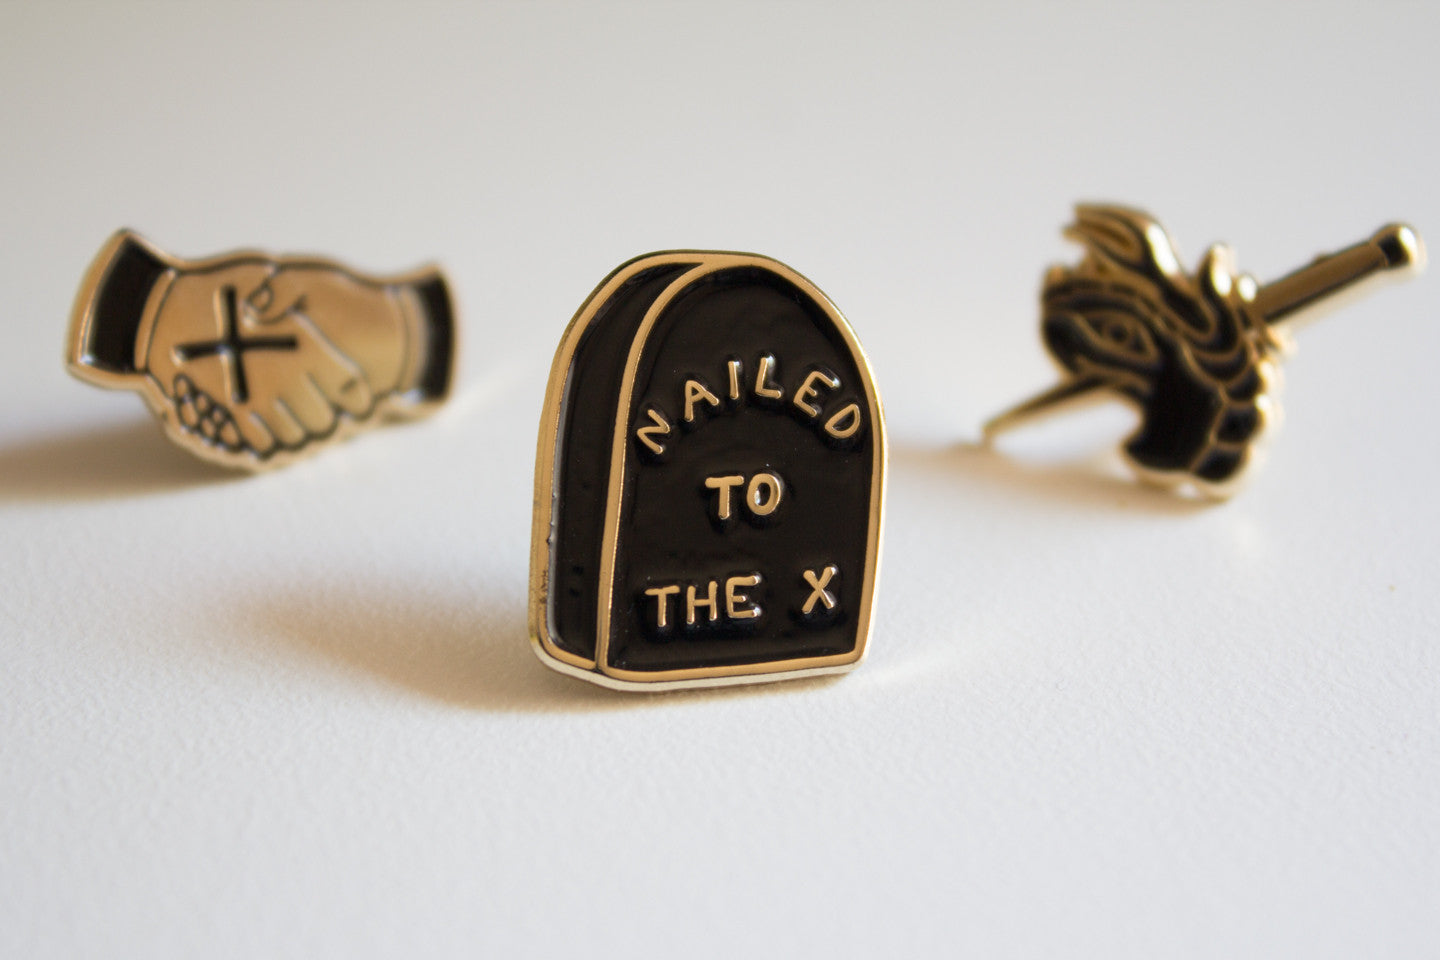 Nailed To The X Lapel Pin